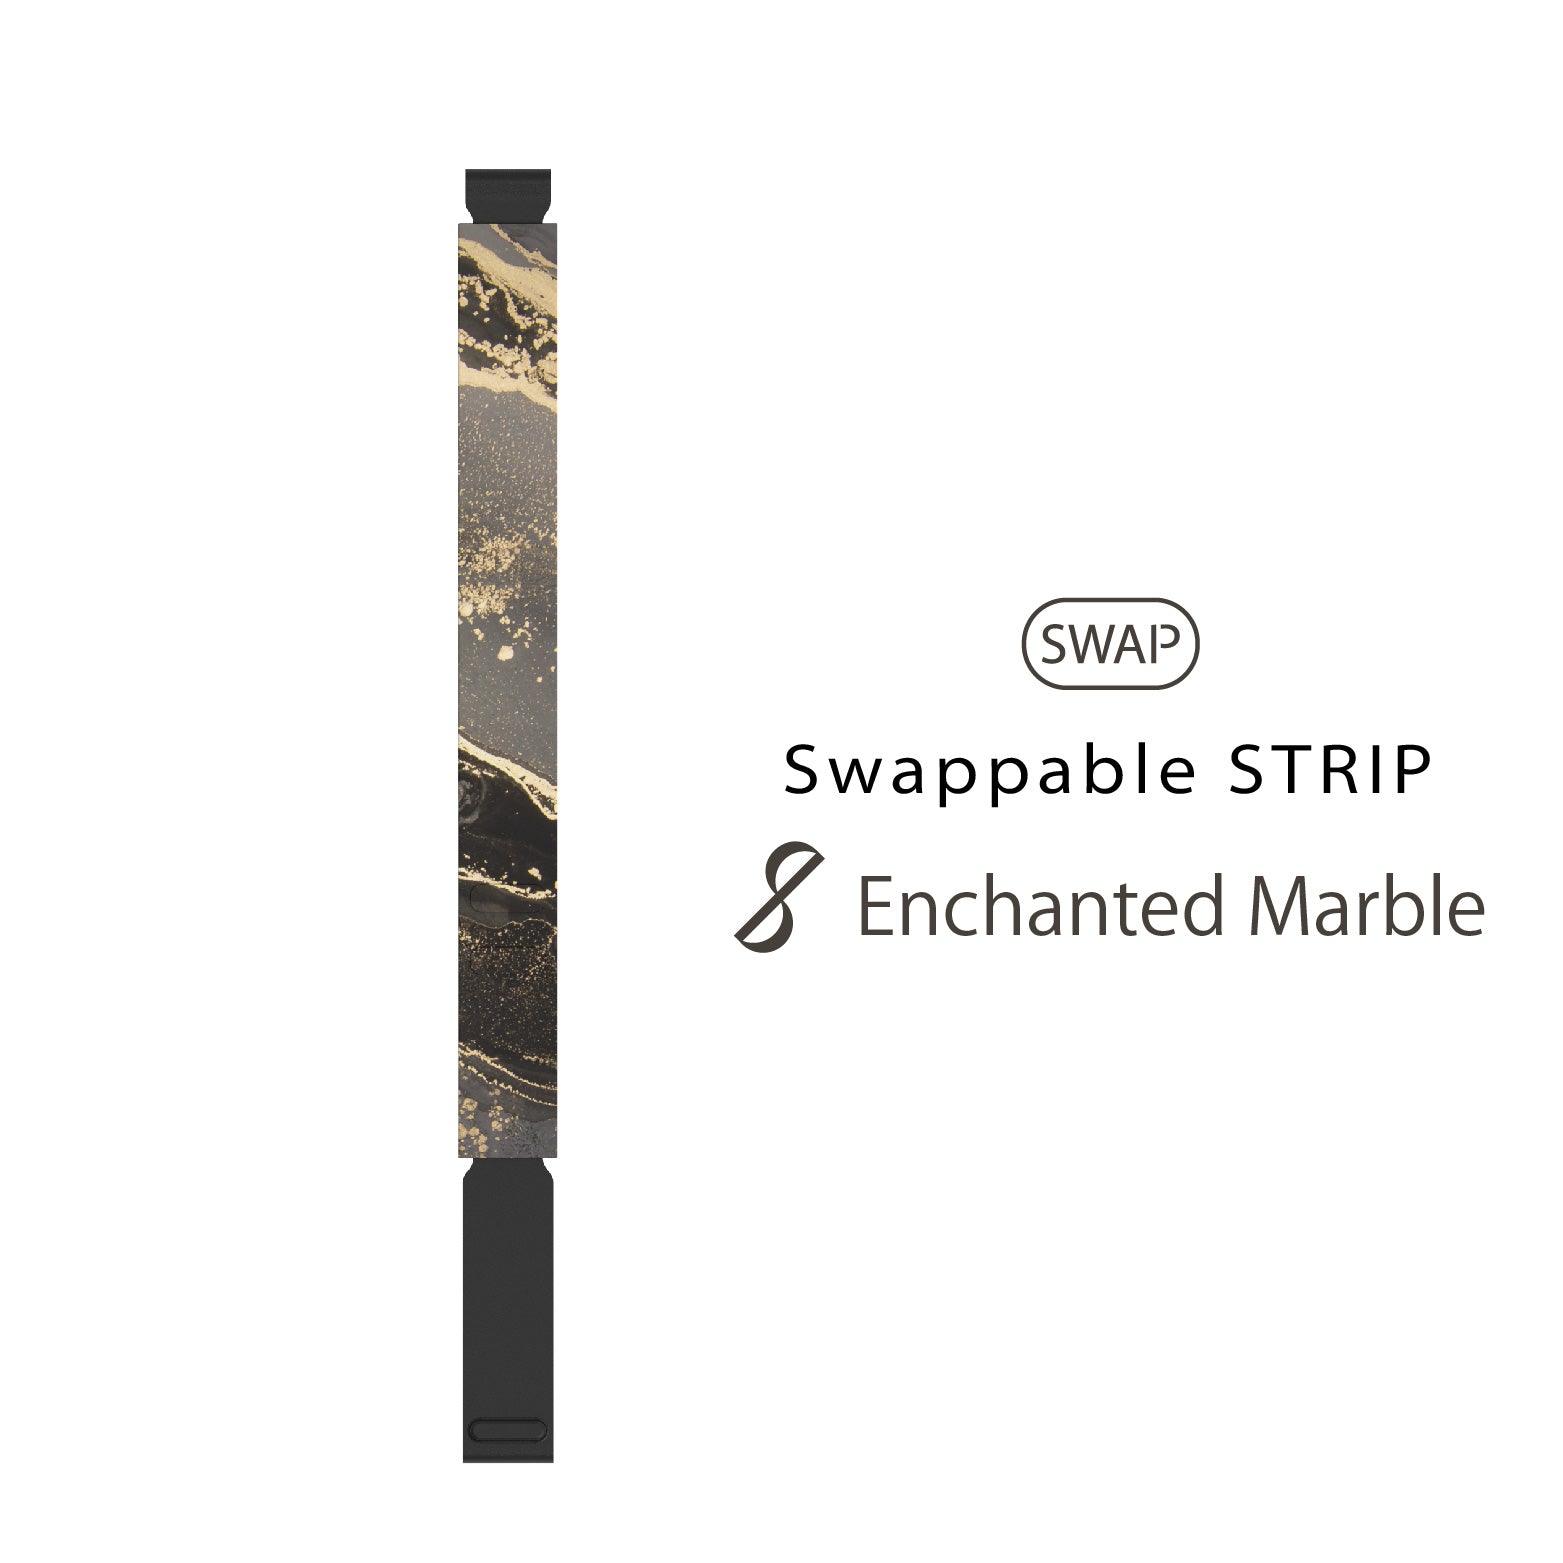 Swappable Strip: Enchanted Marble